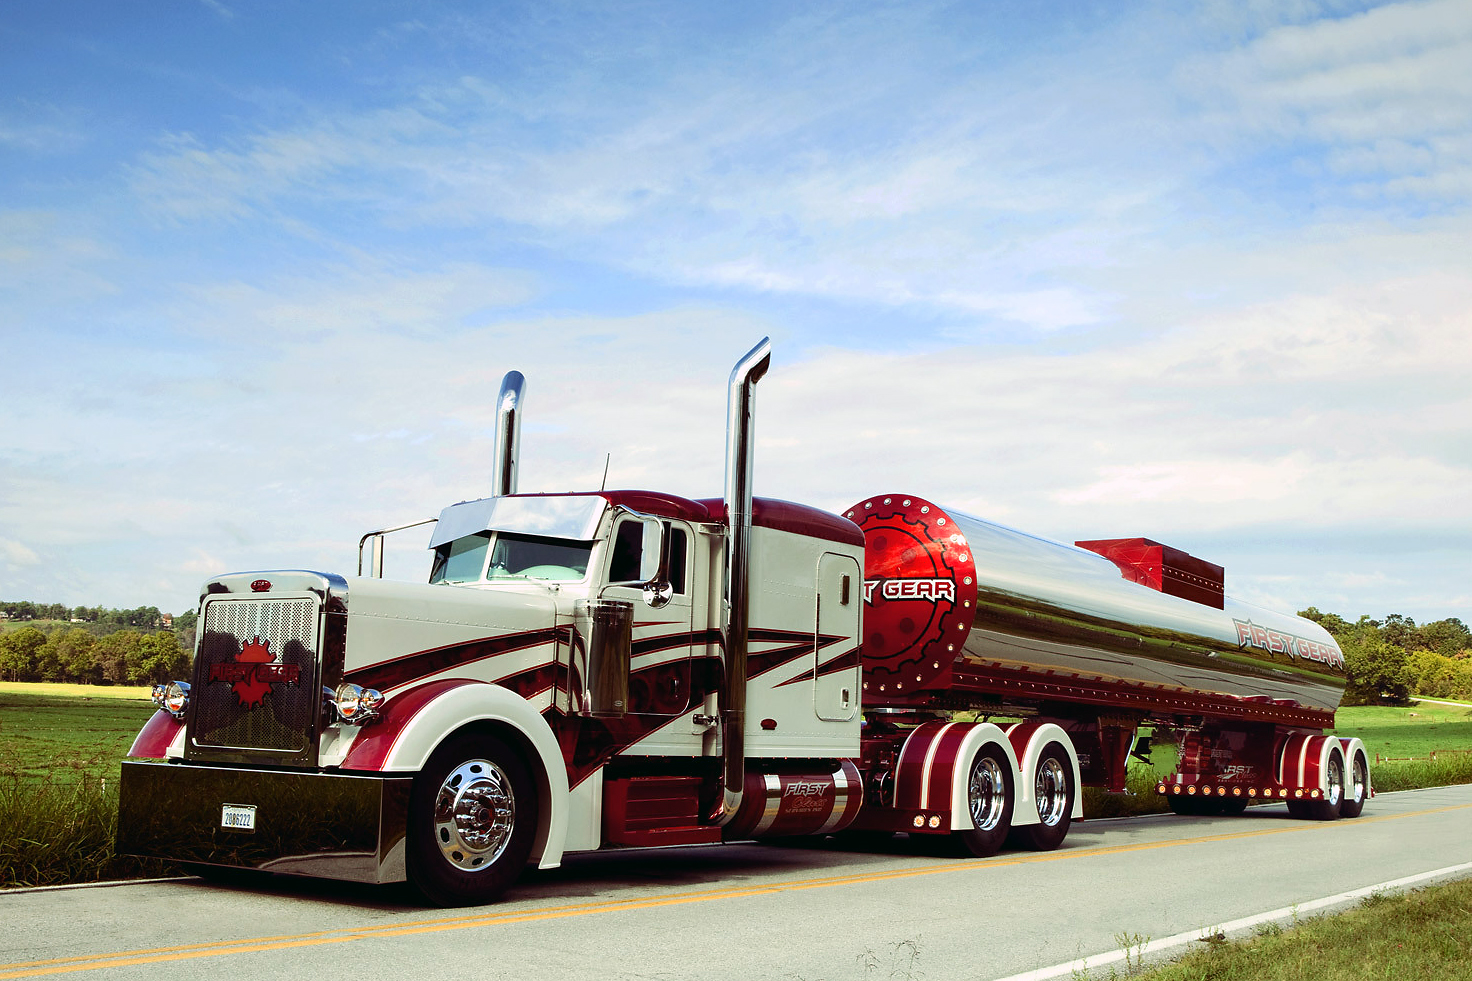 2005, Peterbilt, 379, Red, Candy, And, White, With, First, Gear, Tanker Wallpaper